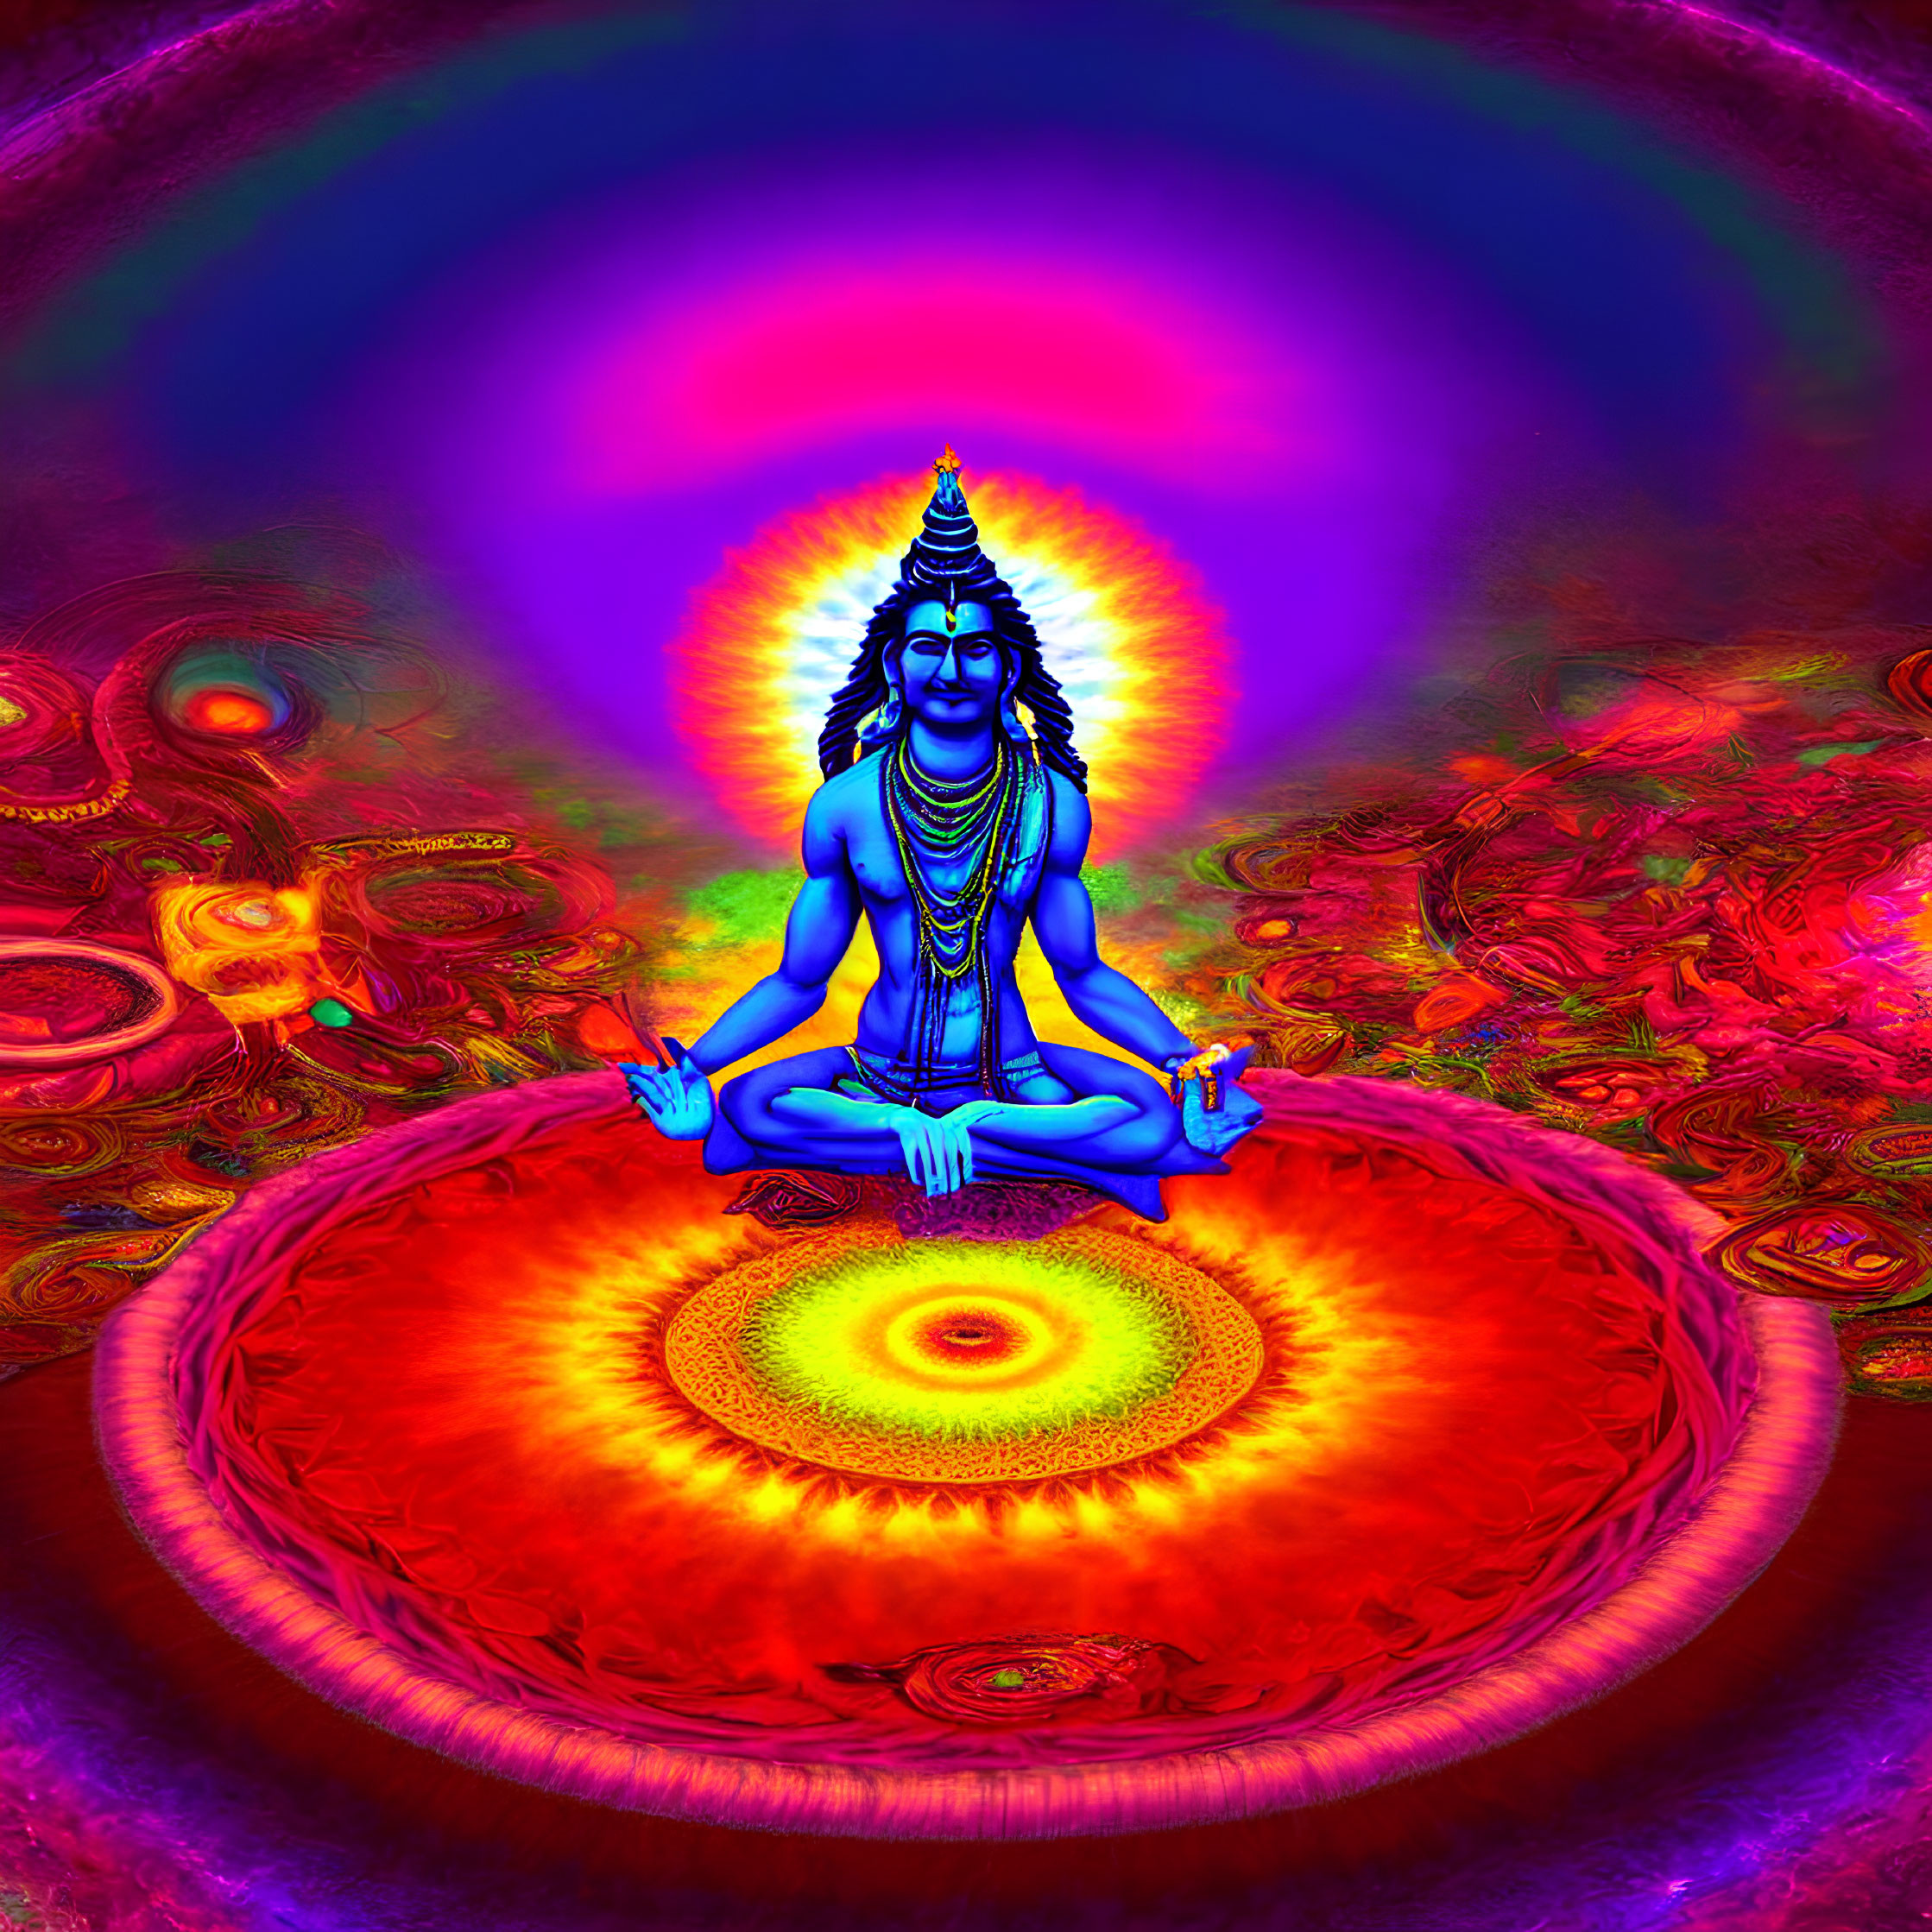 Colorful psychedelic deity meditating with glowing aura in intricate backdrop